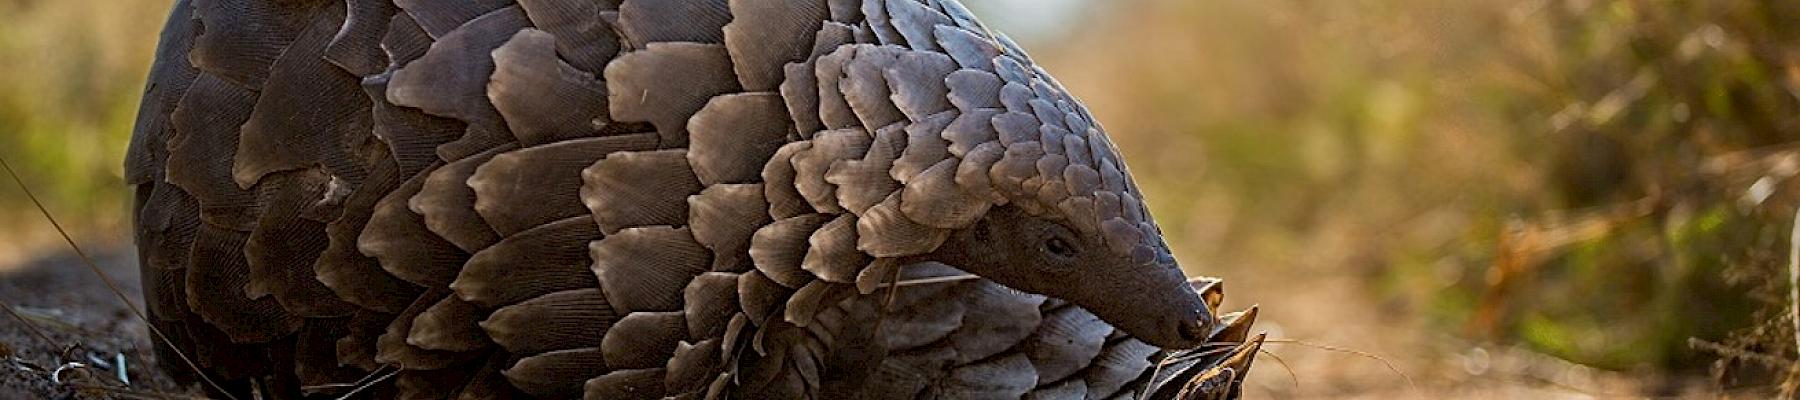 Ground Pangolin © Keith Connelly